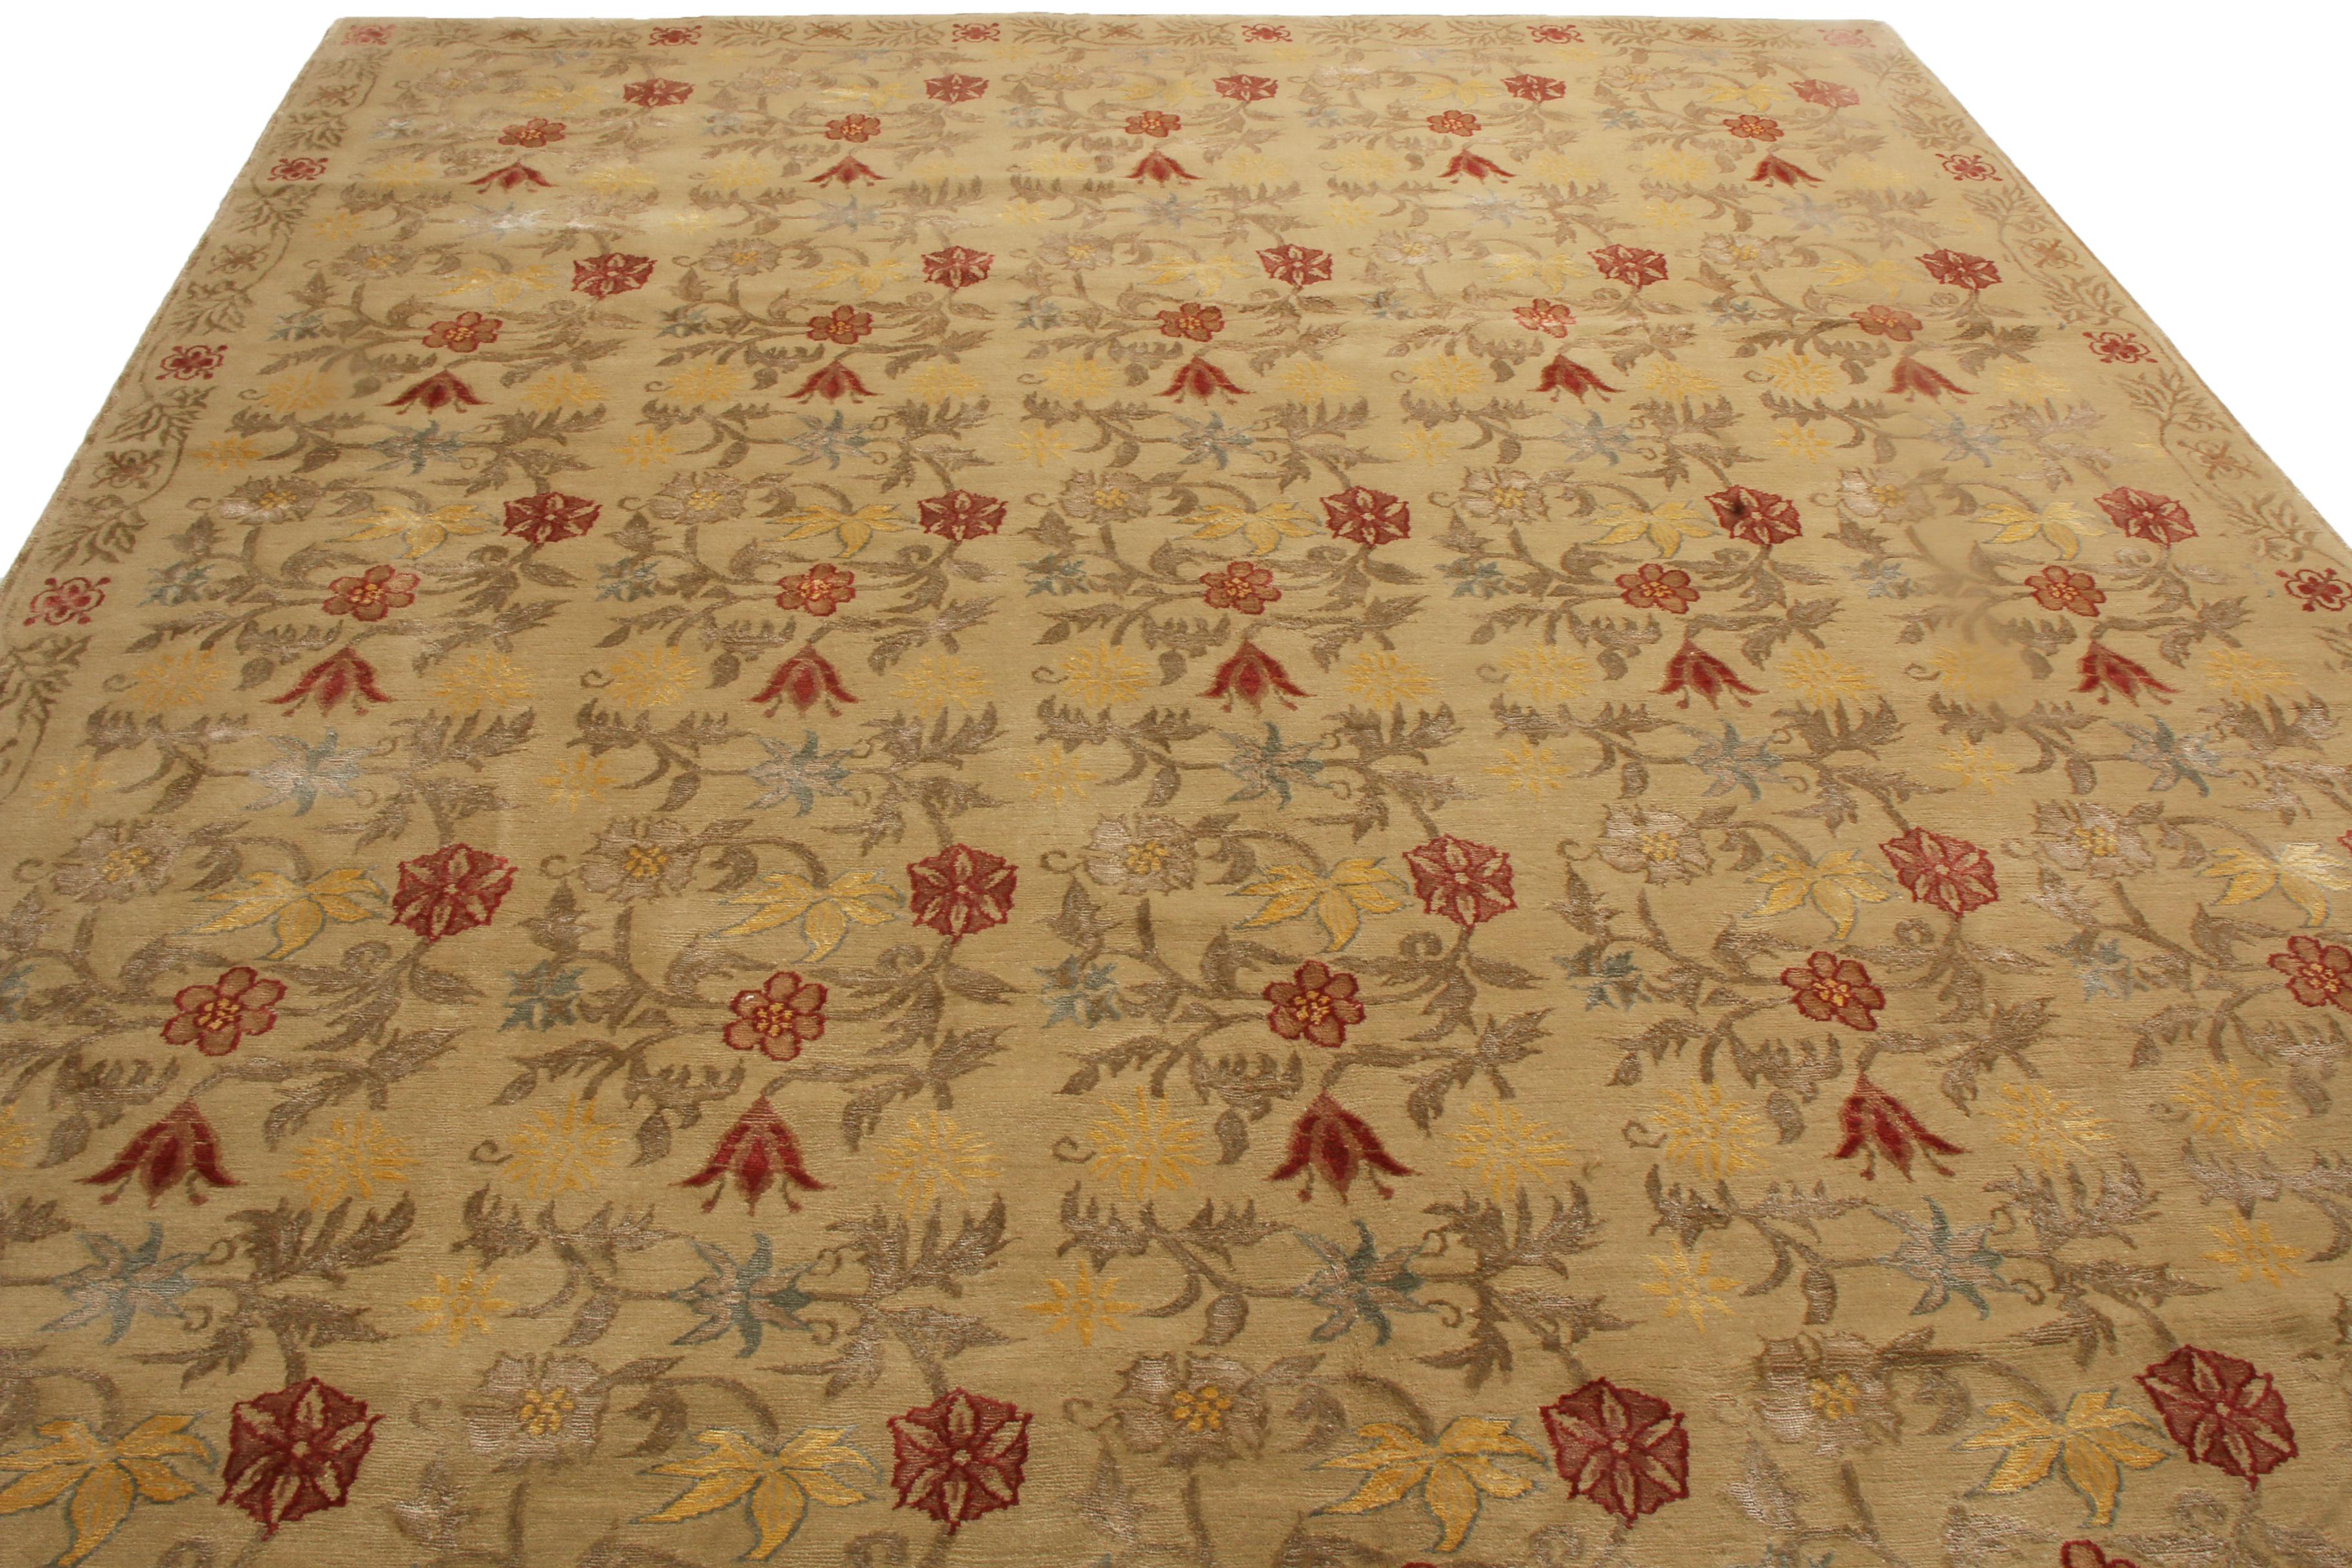 Originating from Nepal, this new transitional rug features a Bilbao floral design, hand knotted in a lustrous combination of wool and silk. Named for the Spanish city fathering its ancestral patterns, the repetition of the all-over tulip and